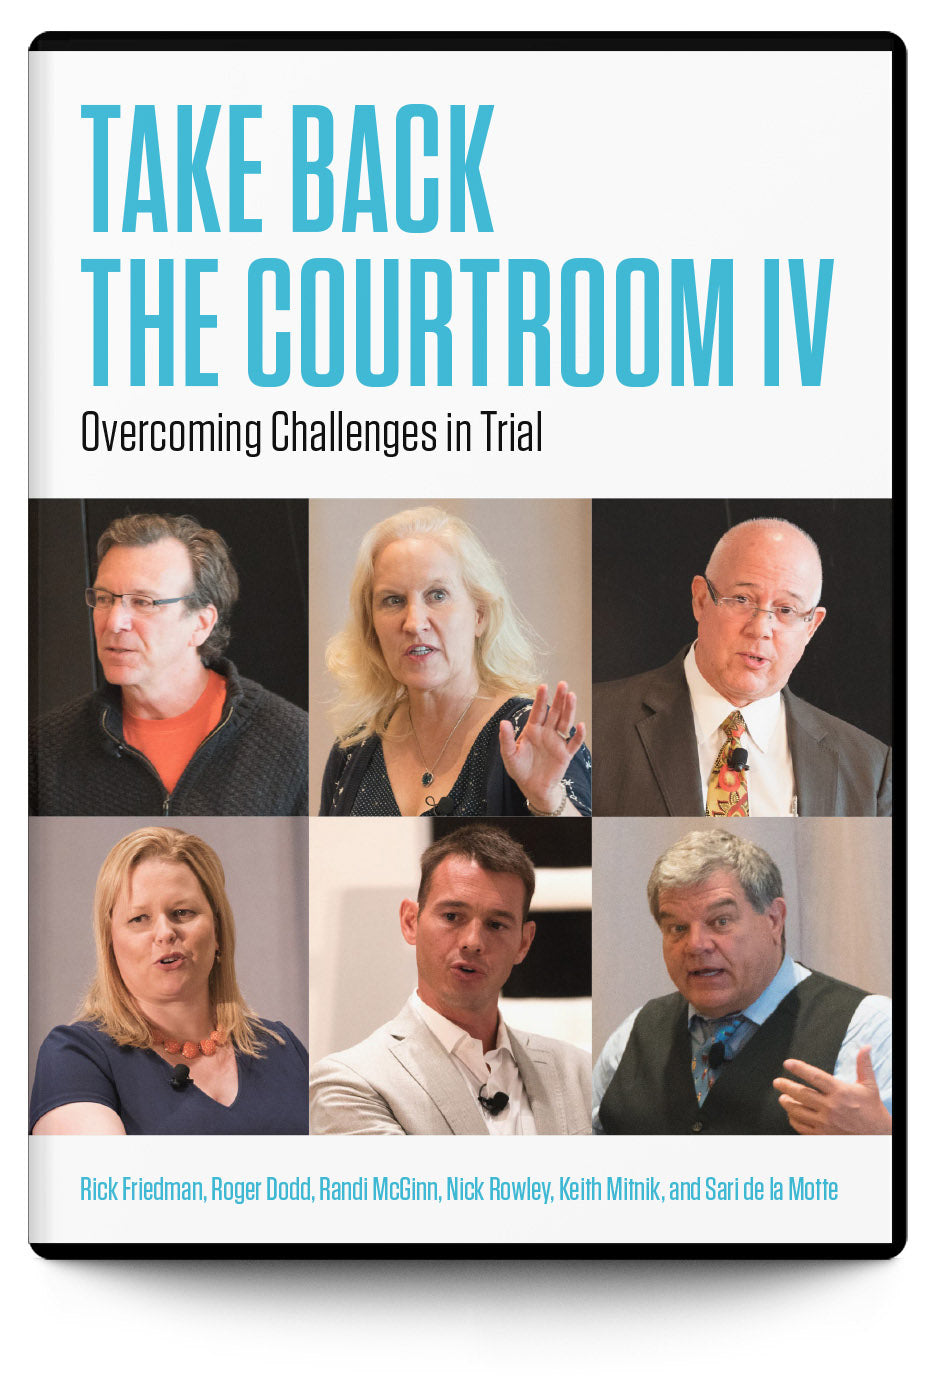 Take Back the Courtroom IV: Overcoming Challenges in Trial